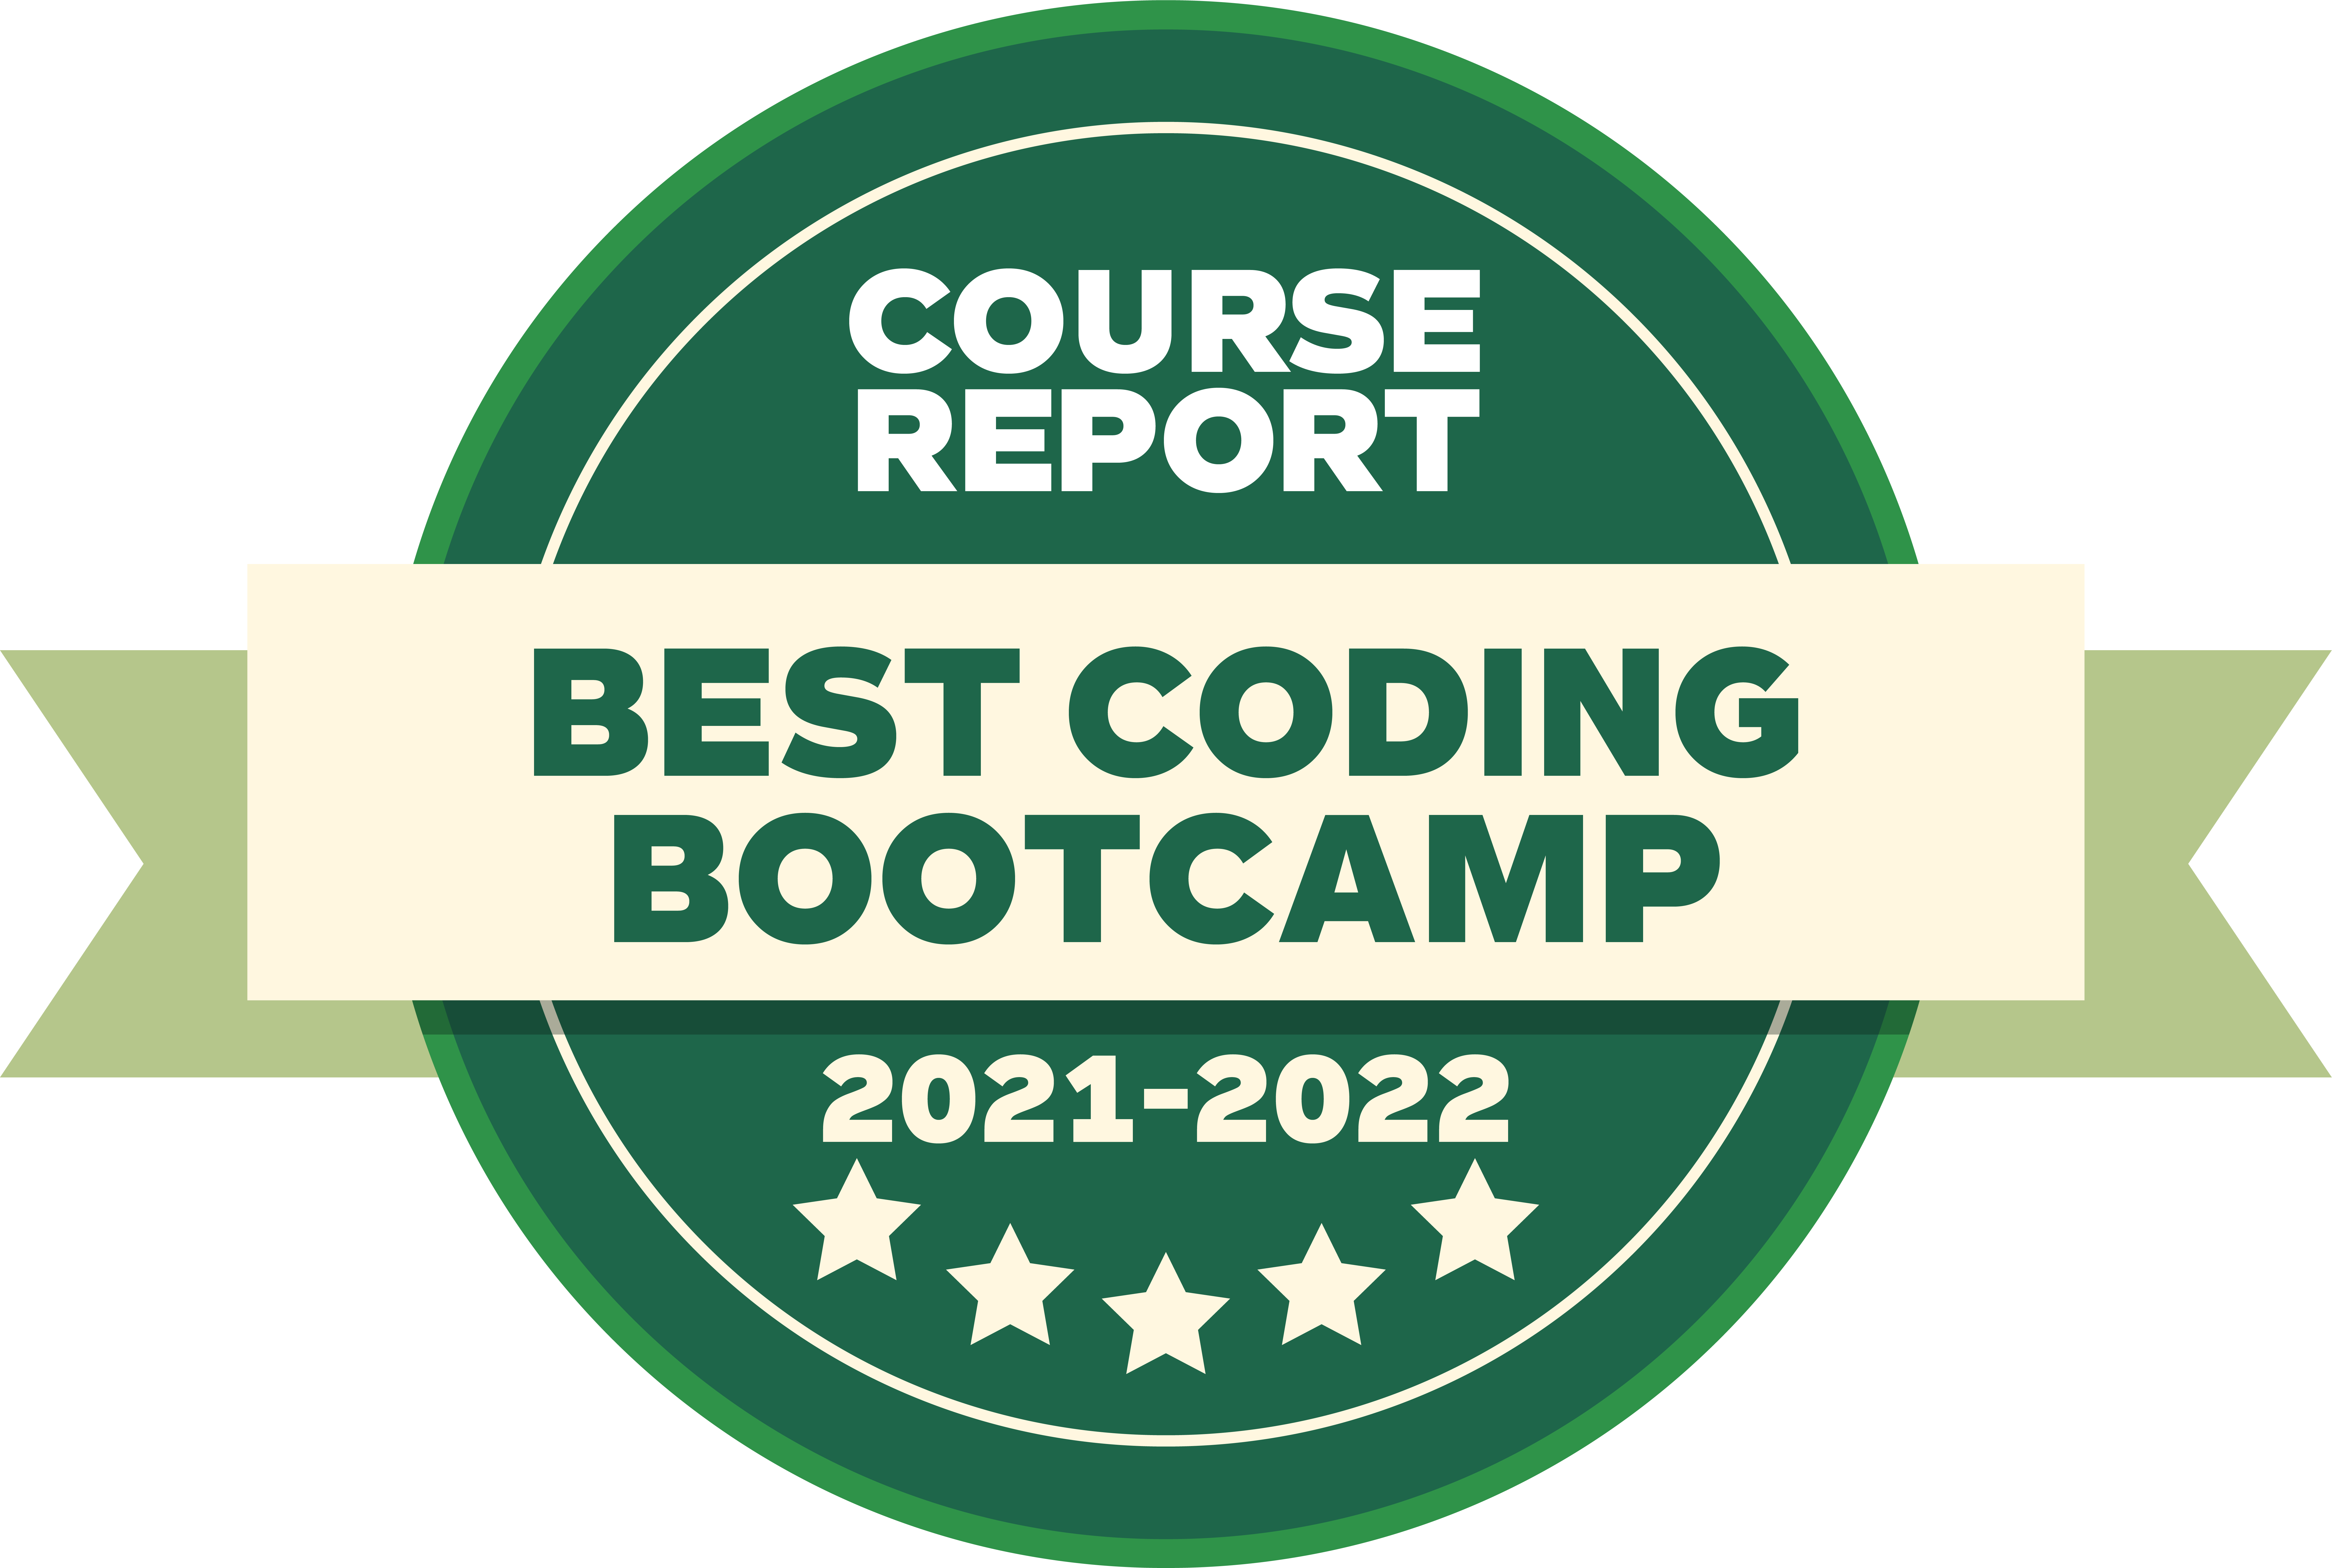 course-report-best-coding-bootcamp-badge-green-2021-2022